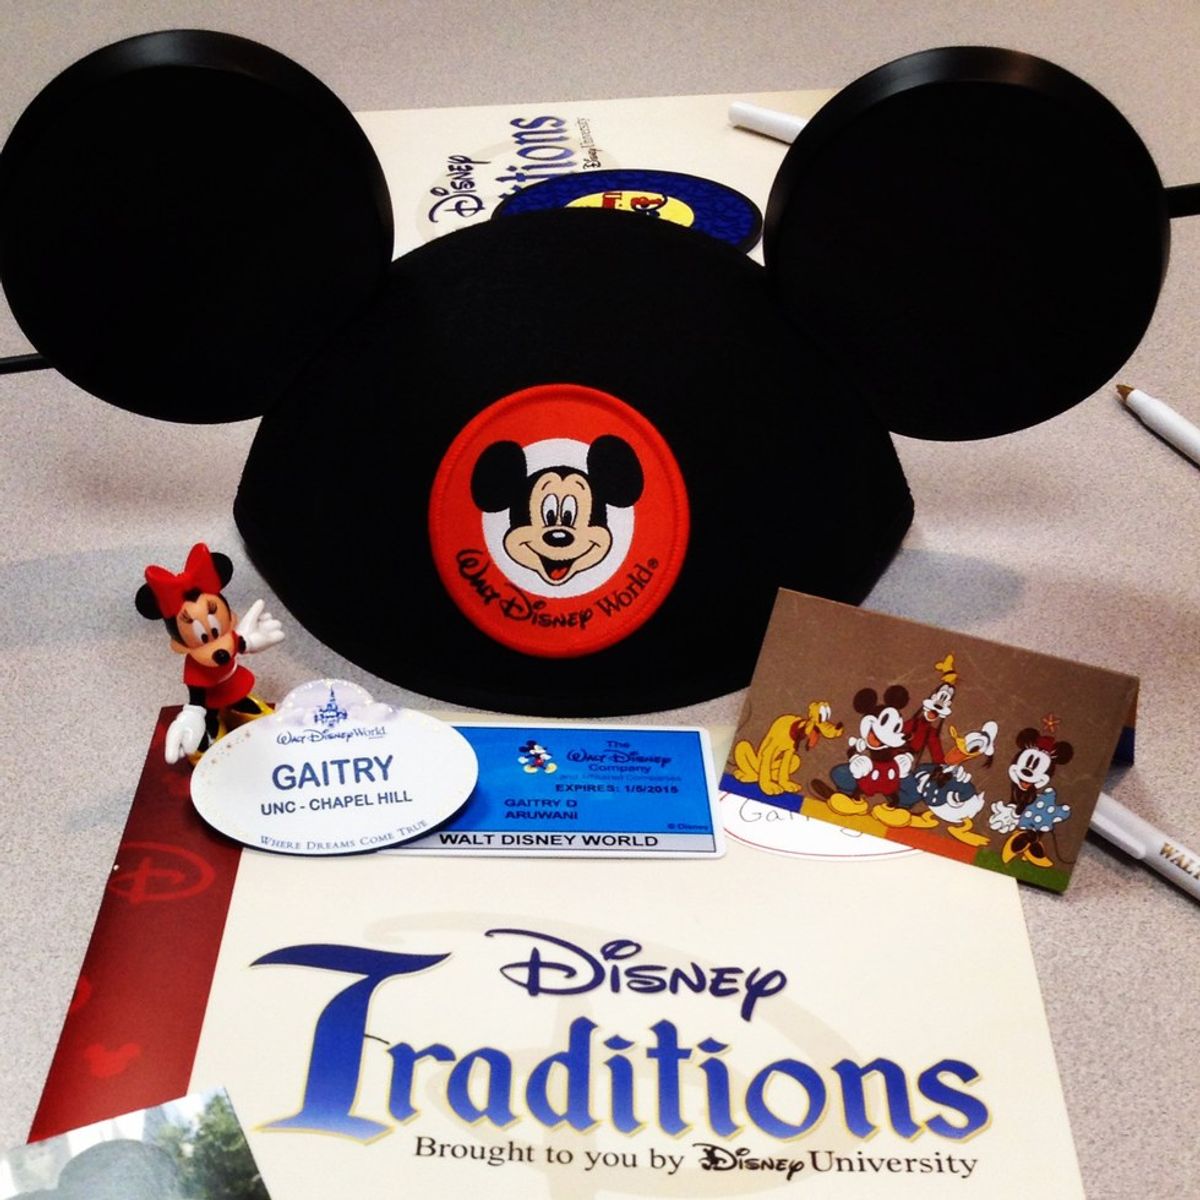 6 Things You Need To Do To Prepare For The Disney College Program